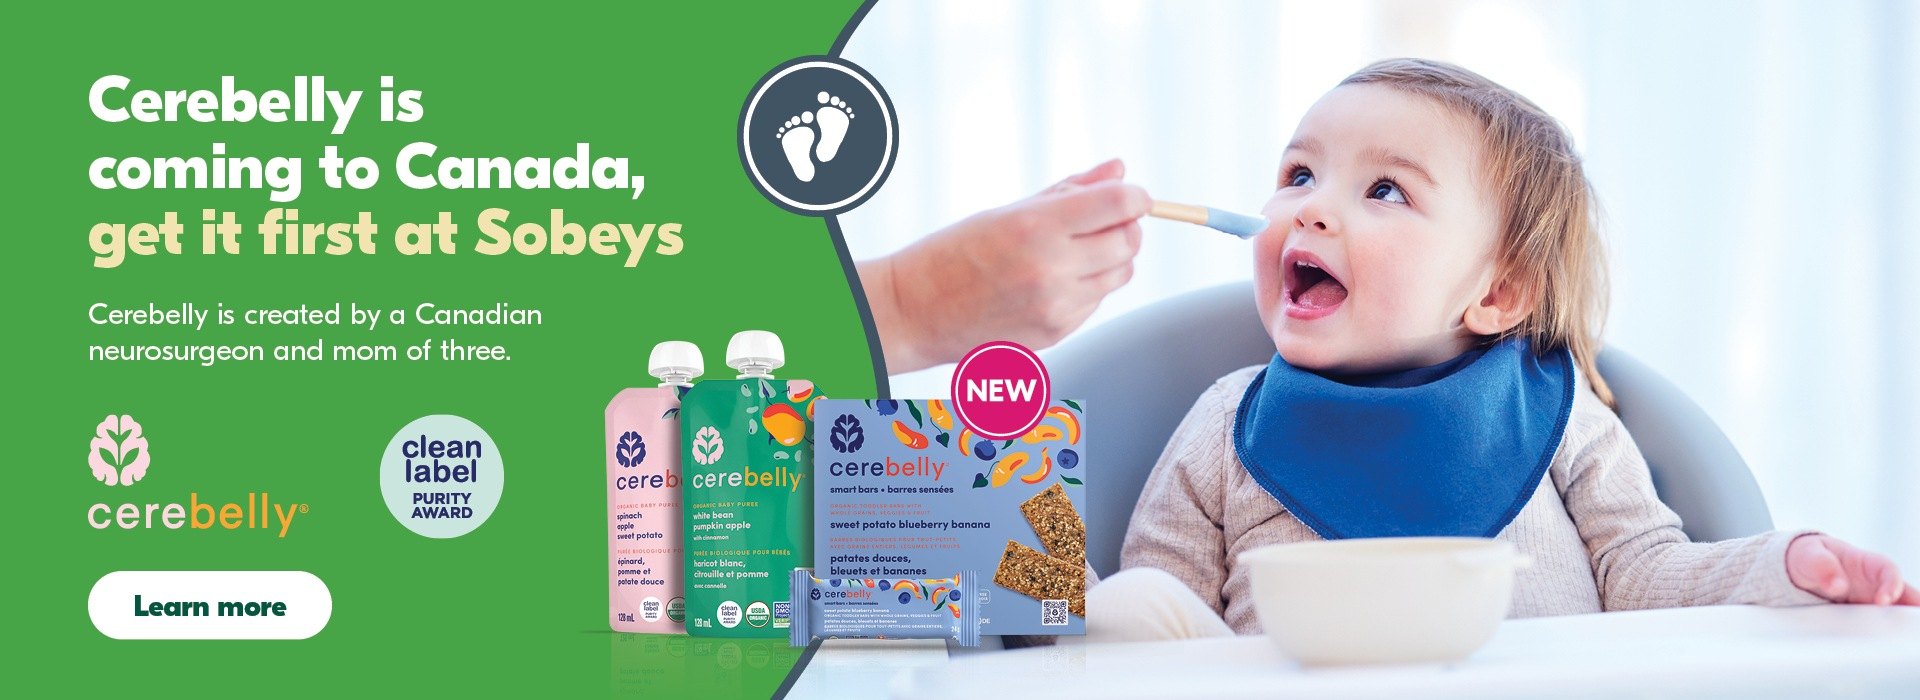 Cerebelly is coming to Canada, get it first at Sobeys